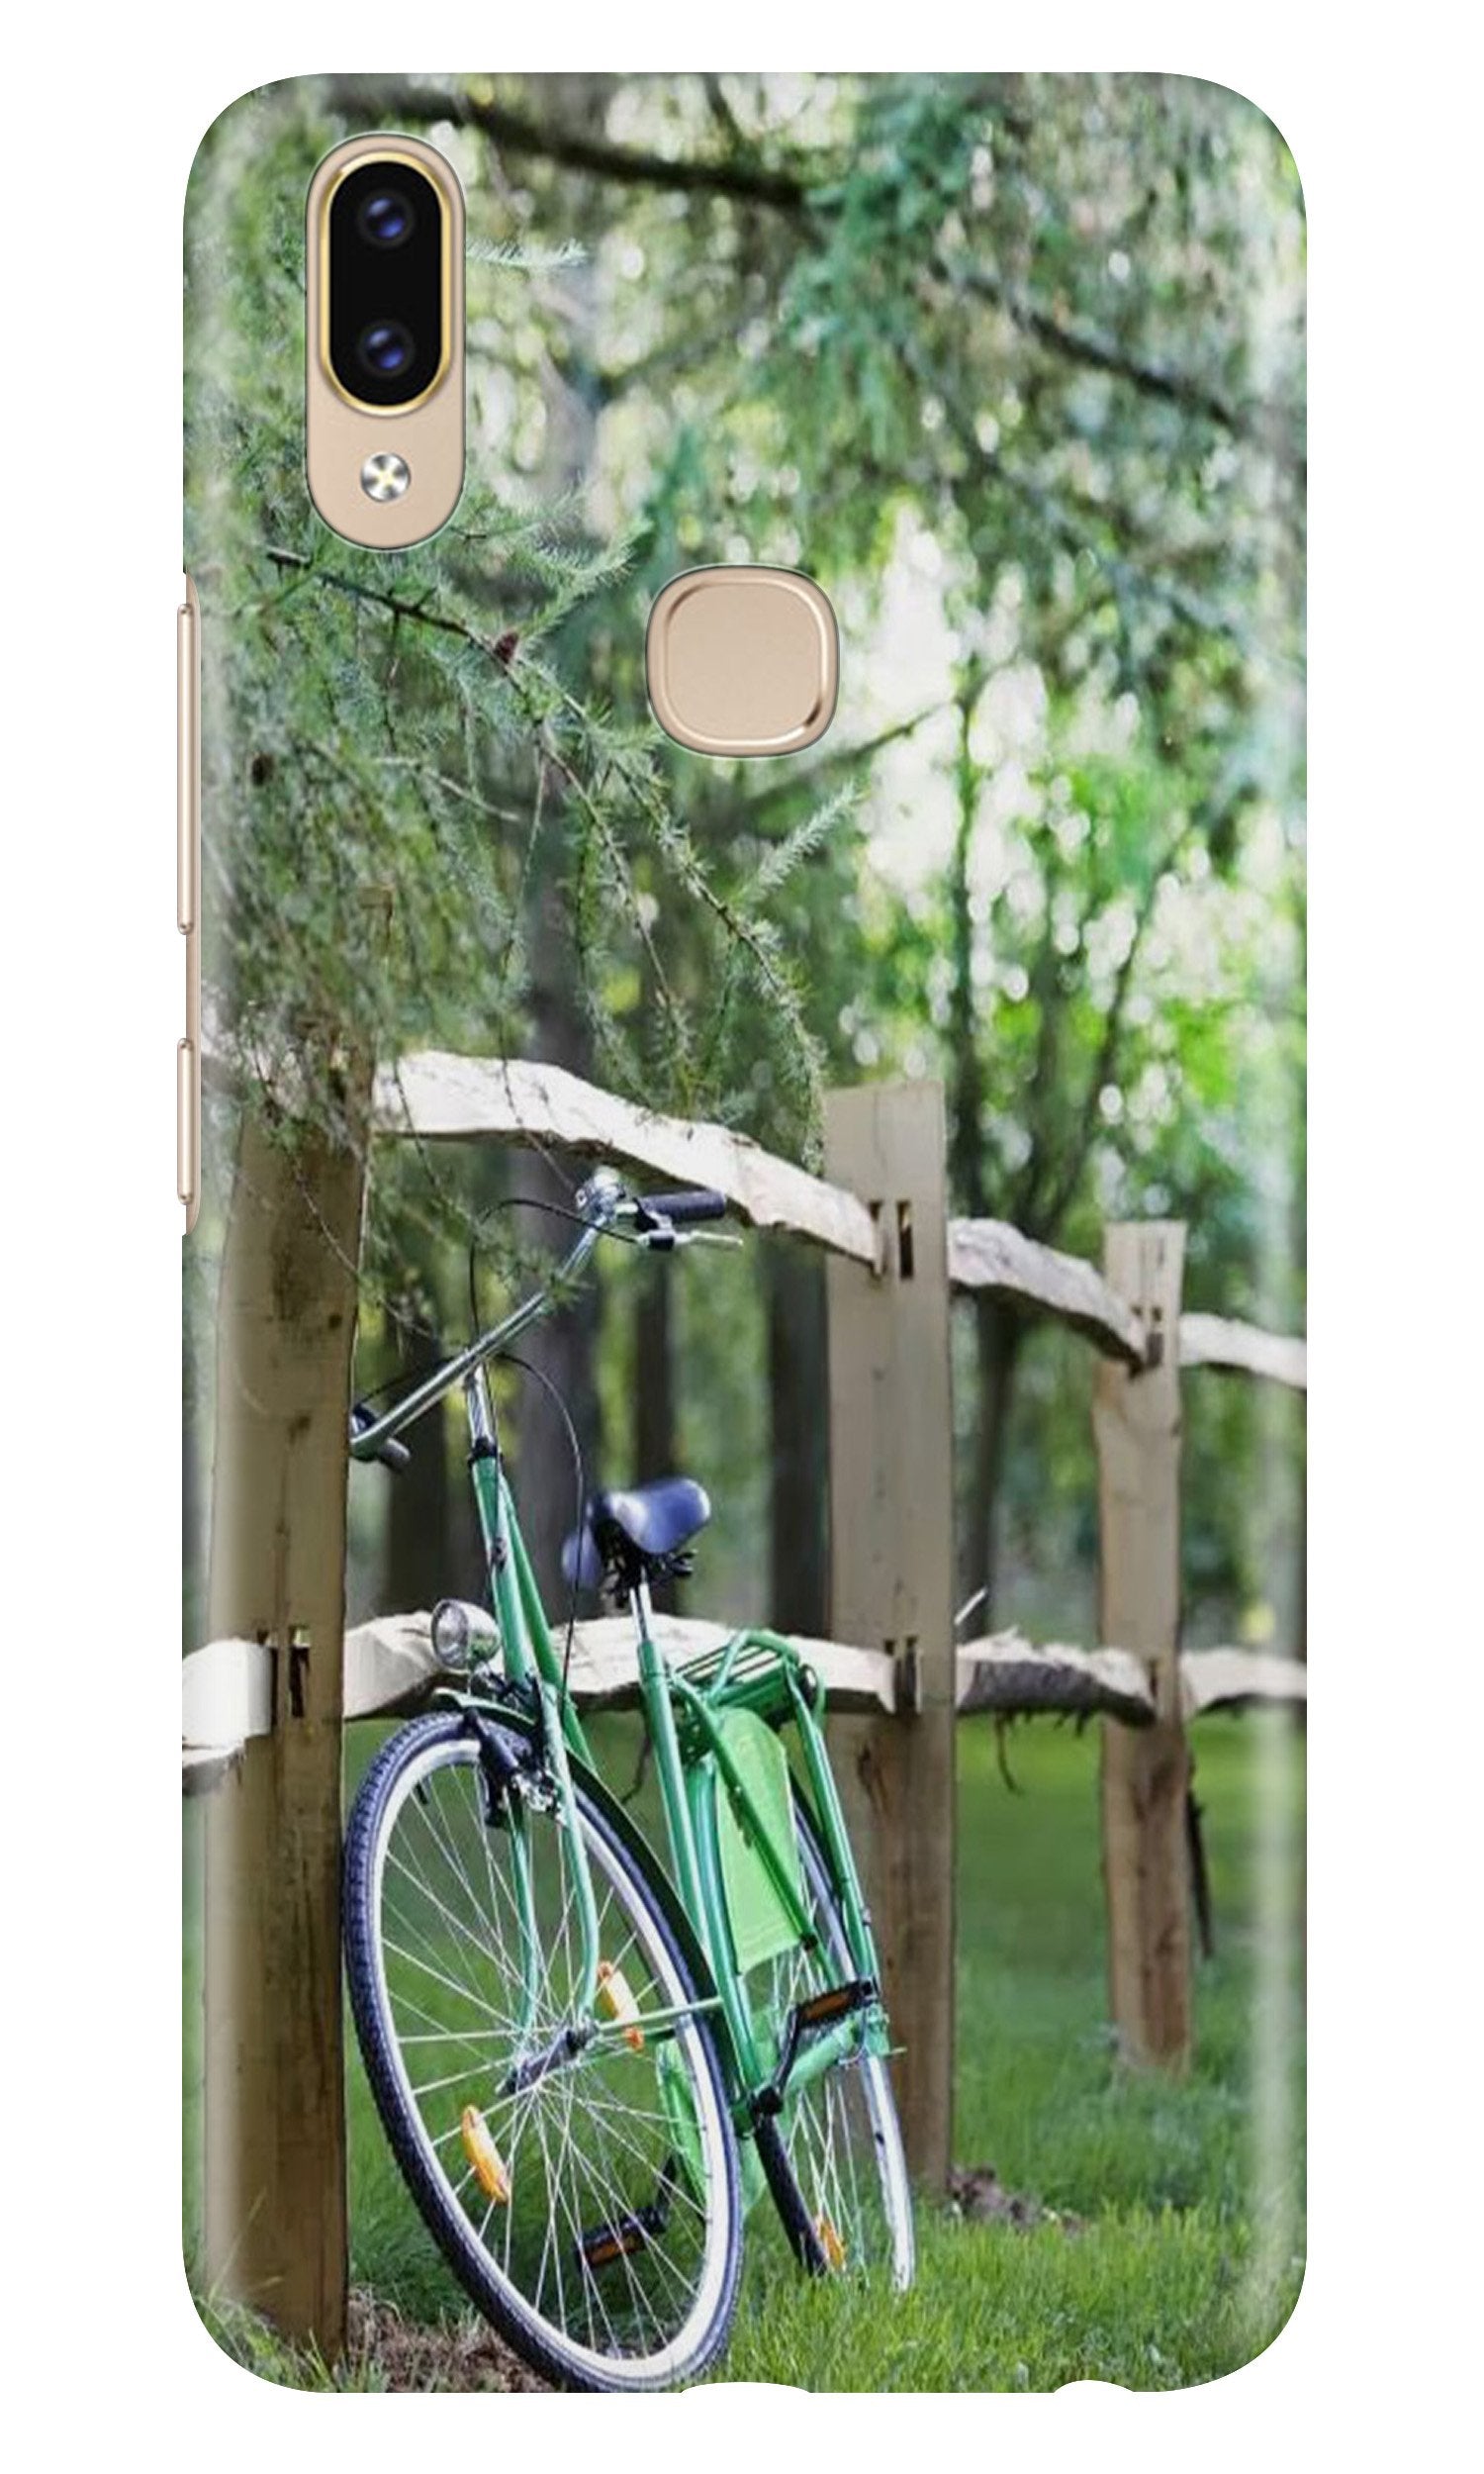 Bicycle Case for Asus Zenfone Max Pro M2 (Design No. 208)